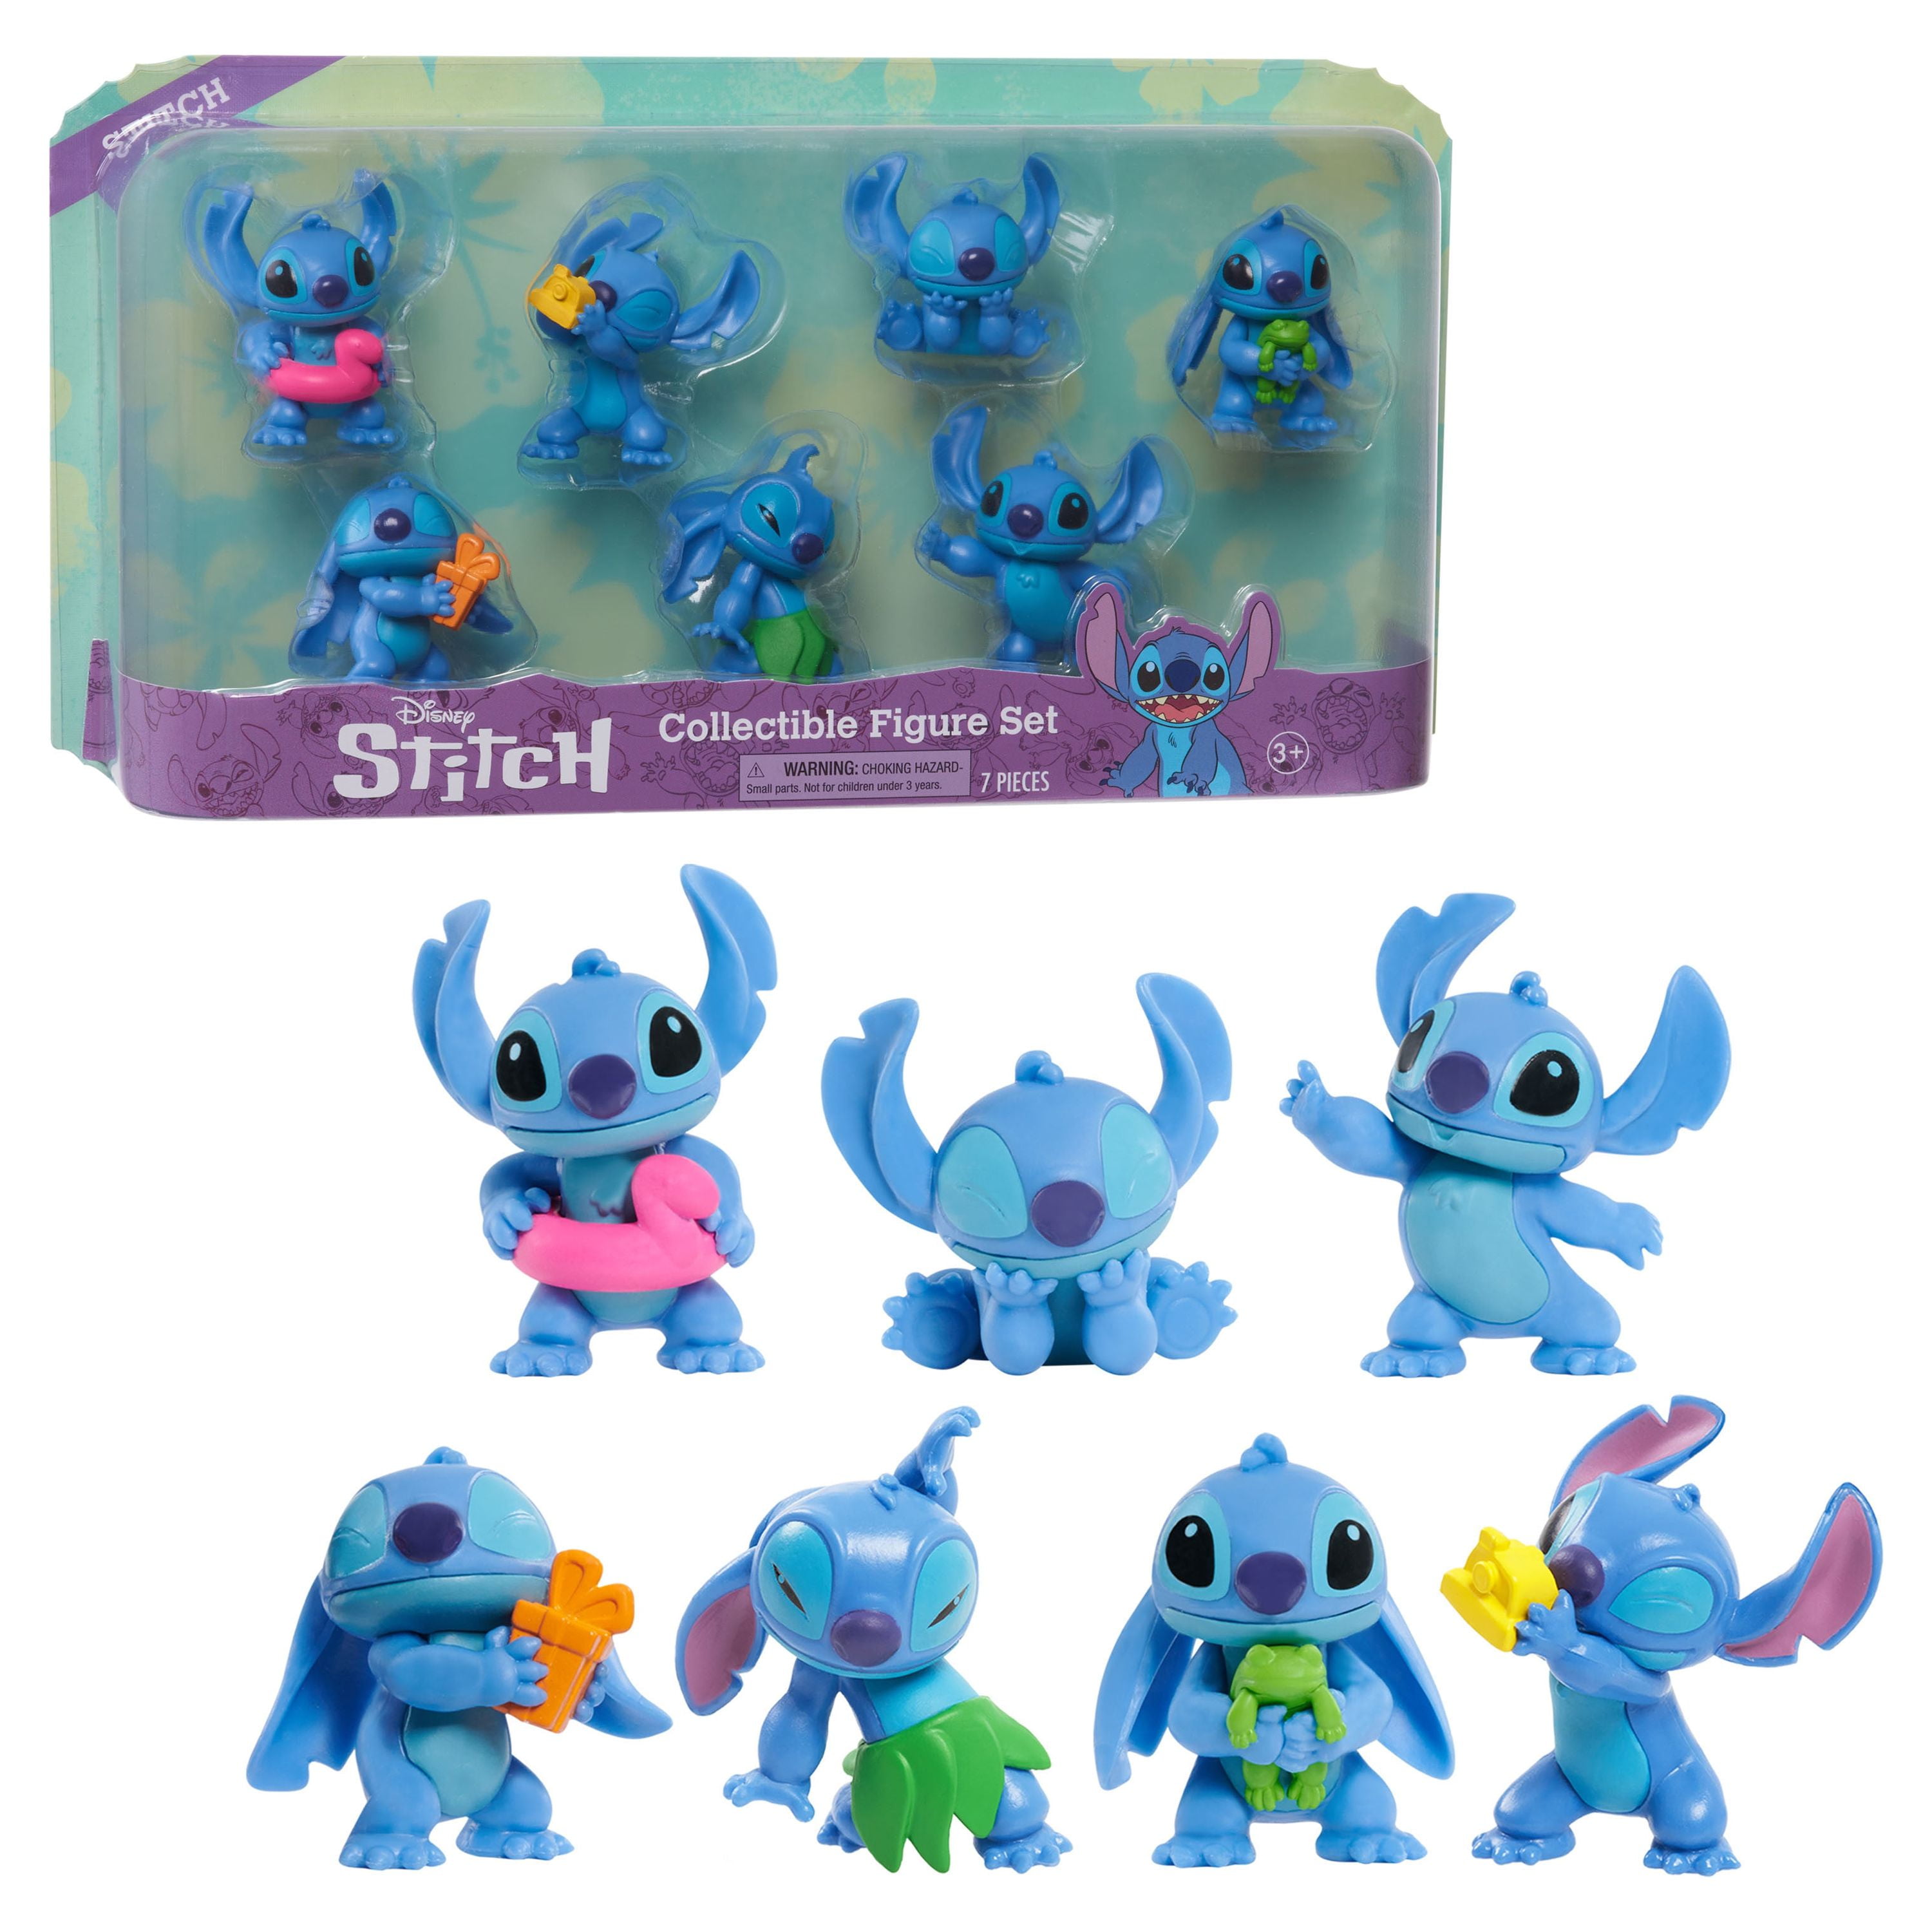 Disney's Lilo & Stitch Collectible Stitch Figure Set, 5-pieces, Officially  Licensed Kids Toys for Ages 3 Up by Just Play